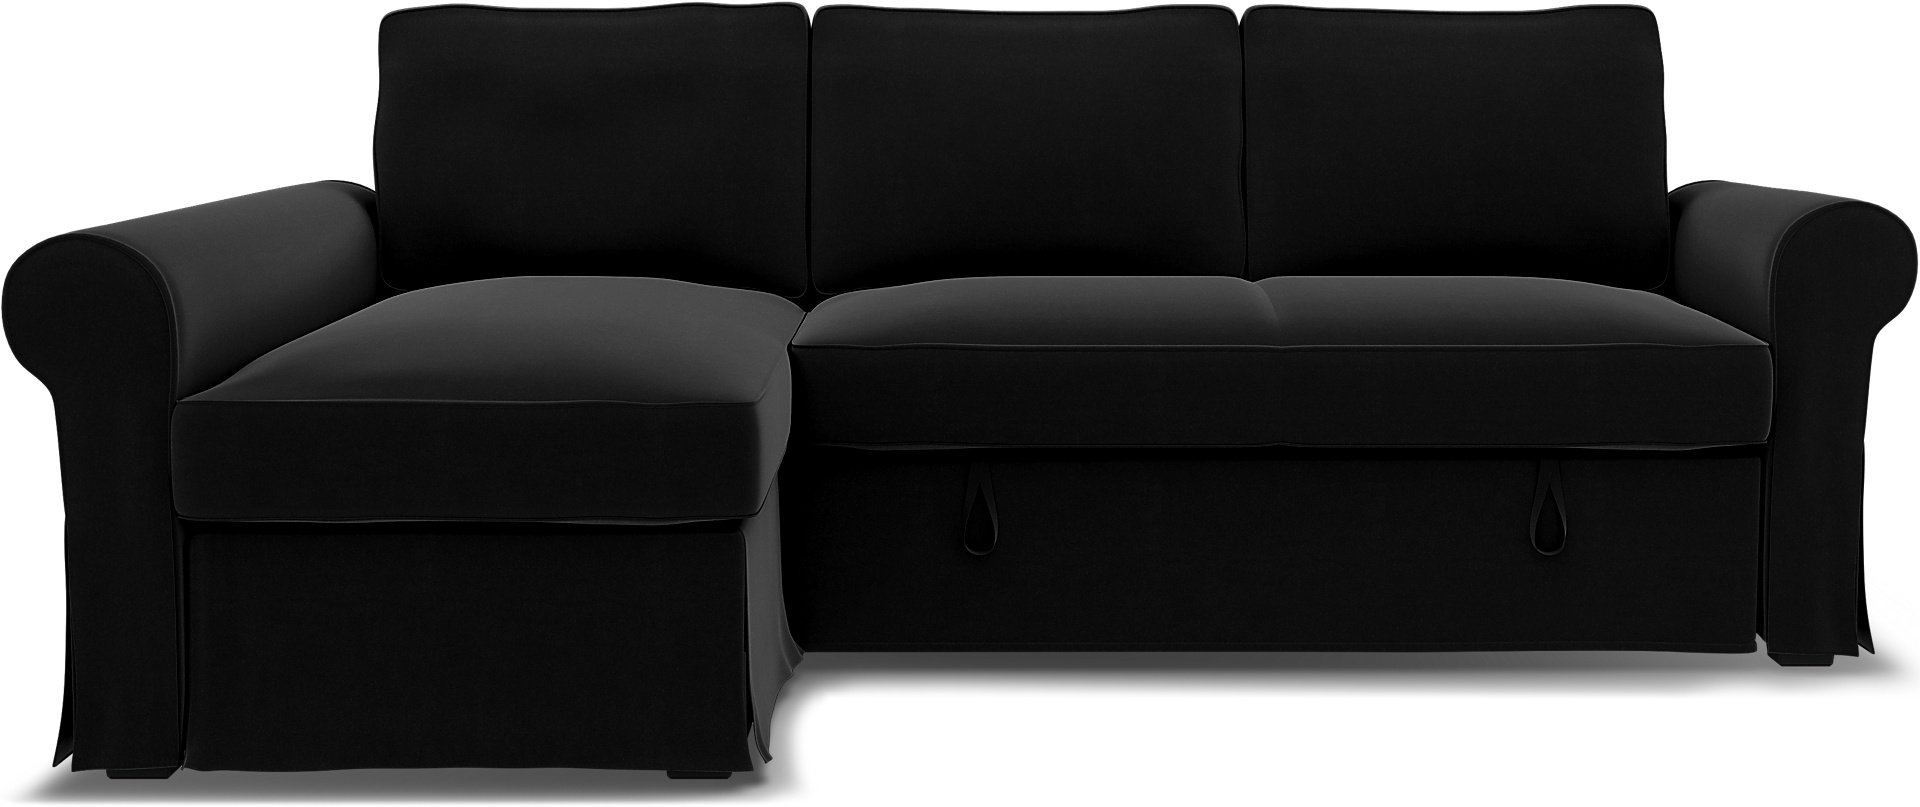 IKEA - Backabro Sofabed with Chaise Cover, Black, Velvet - Bemz